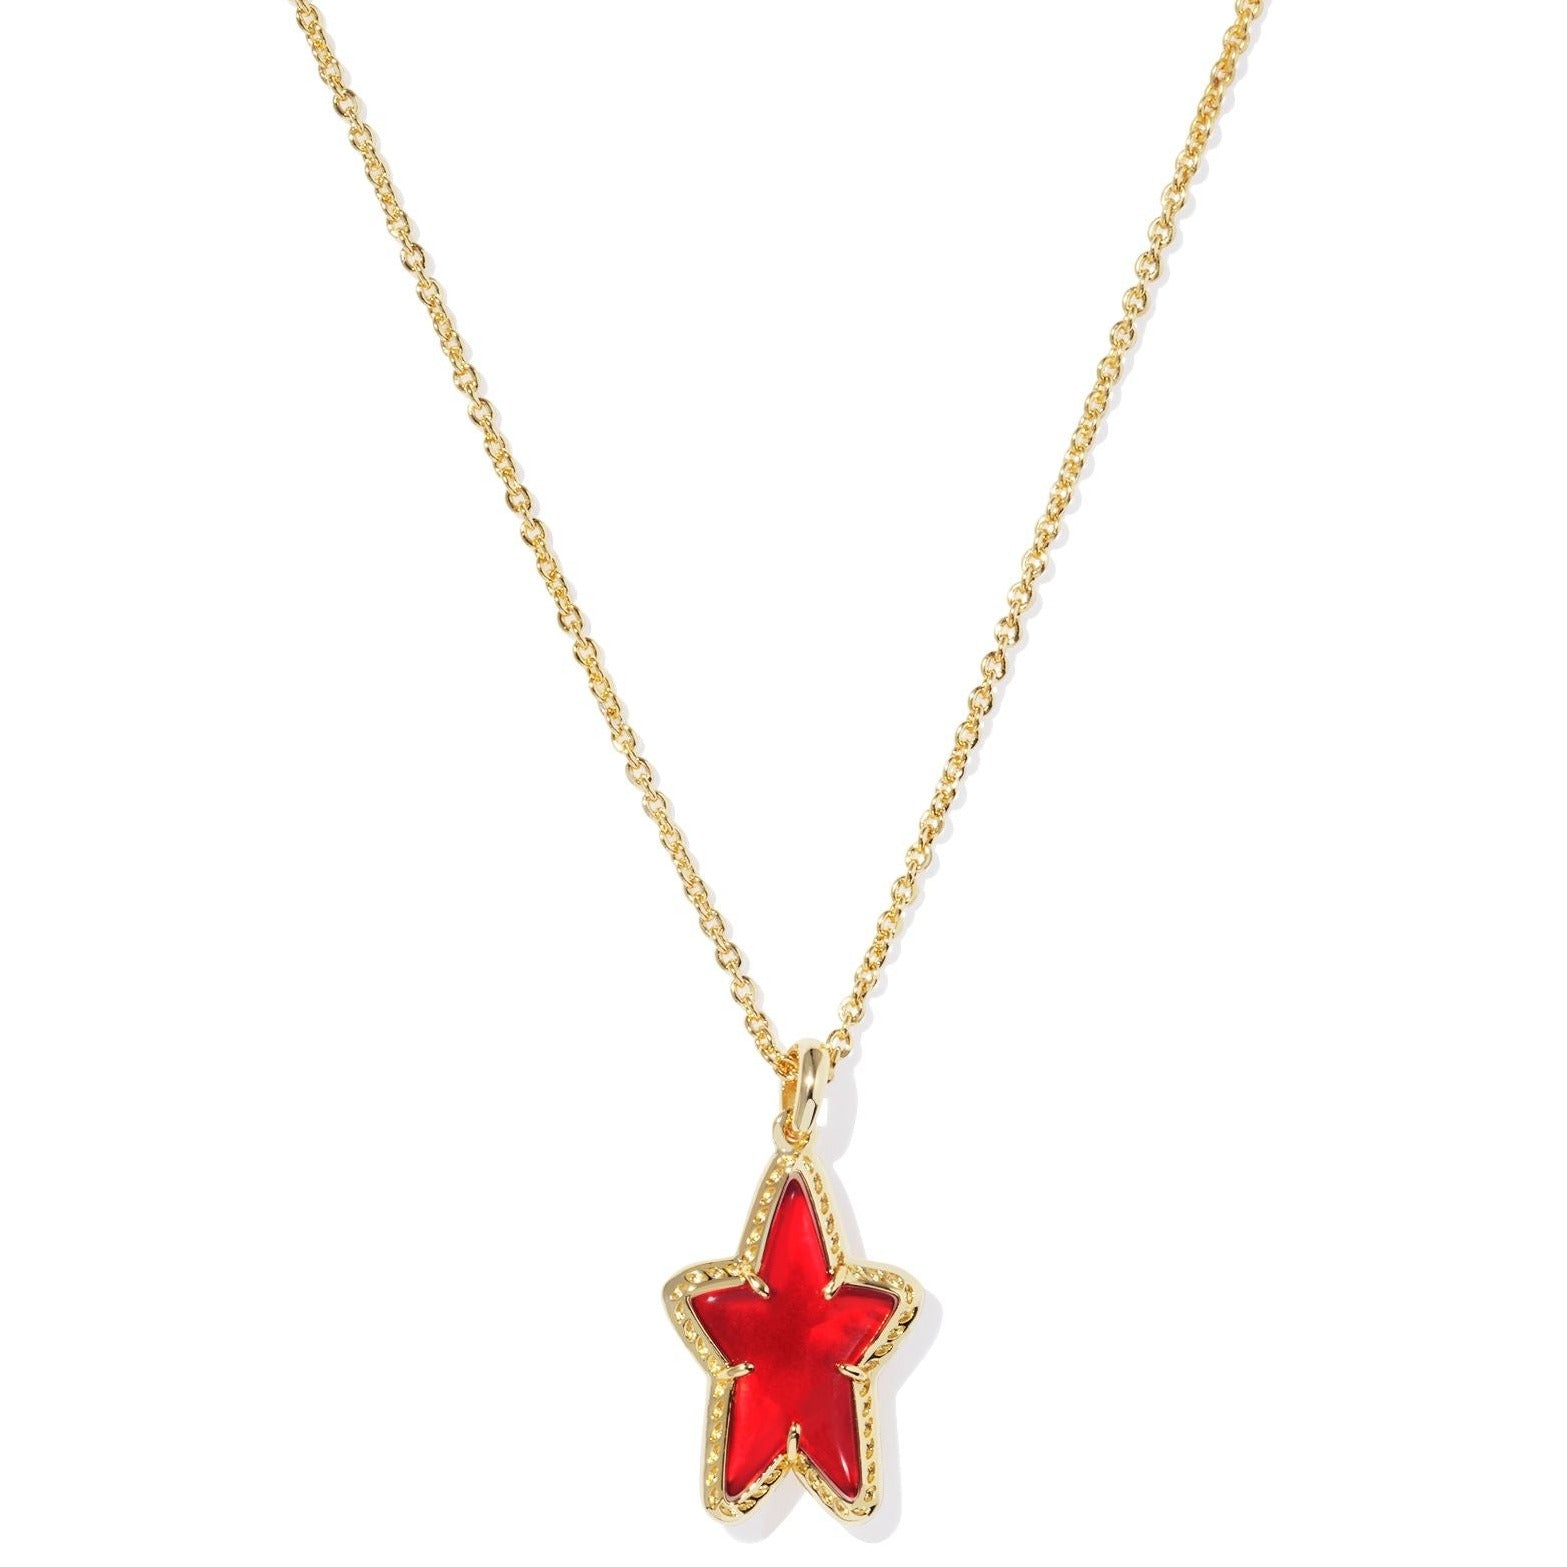 Kendra Scott | Ada Gold Star Short Pendant Necklace in Red Illusion - Giddy Up Glamour Boutique